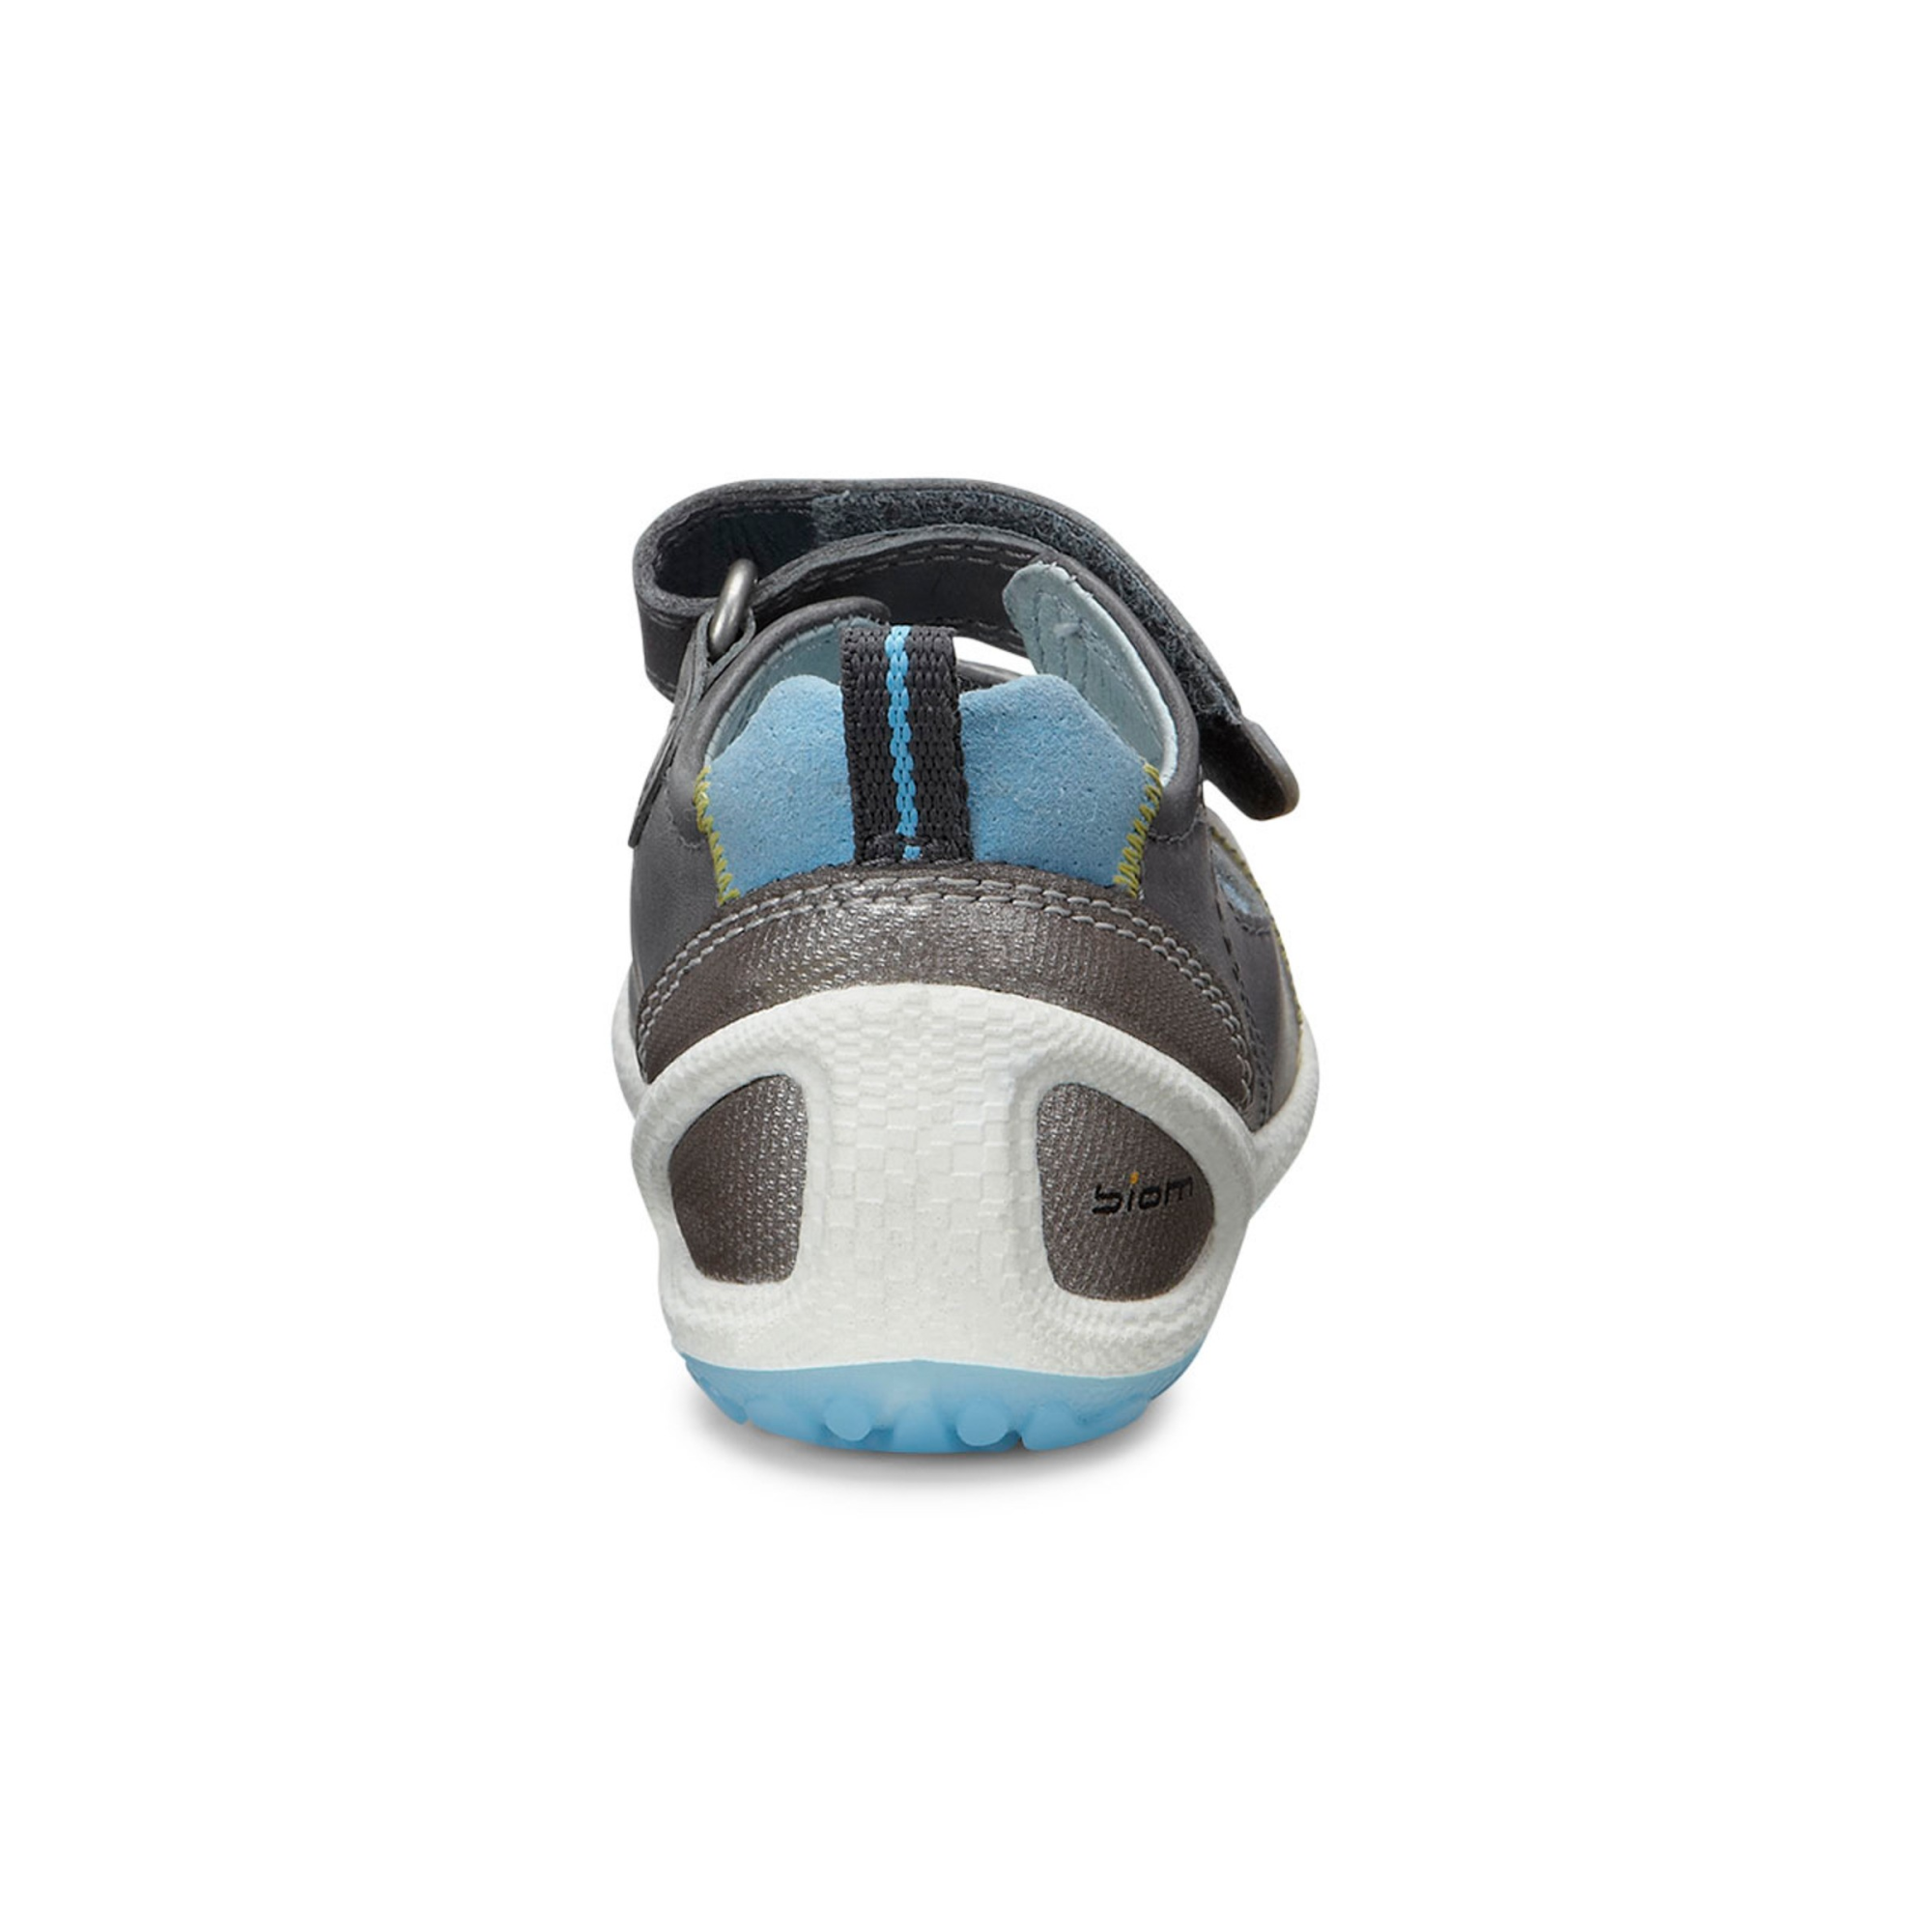 Ecco Lite Infants Sandal 19 - - Mall - Veryk Mall, many quick response, safe your money!